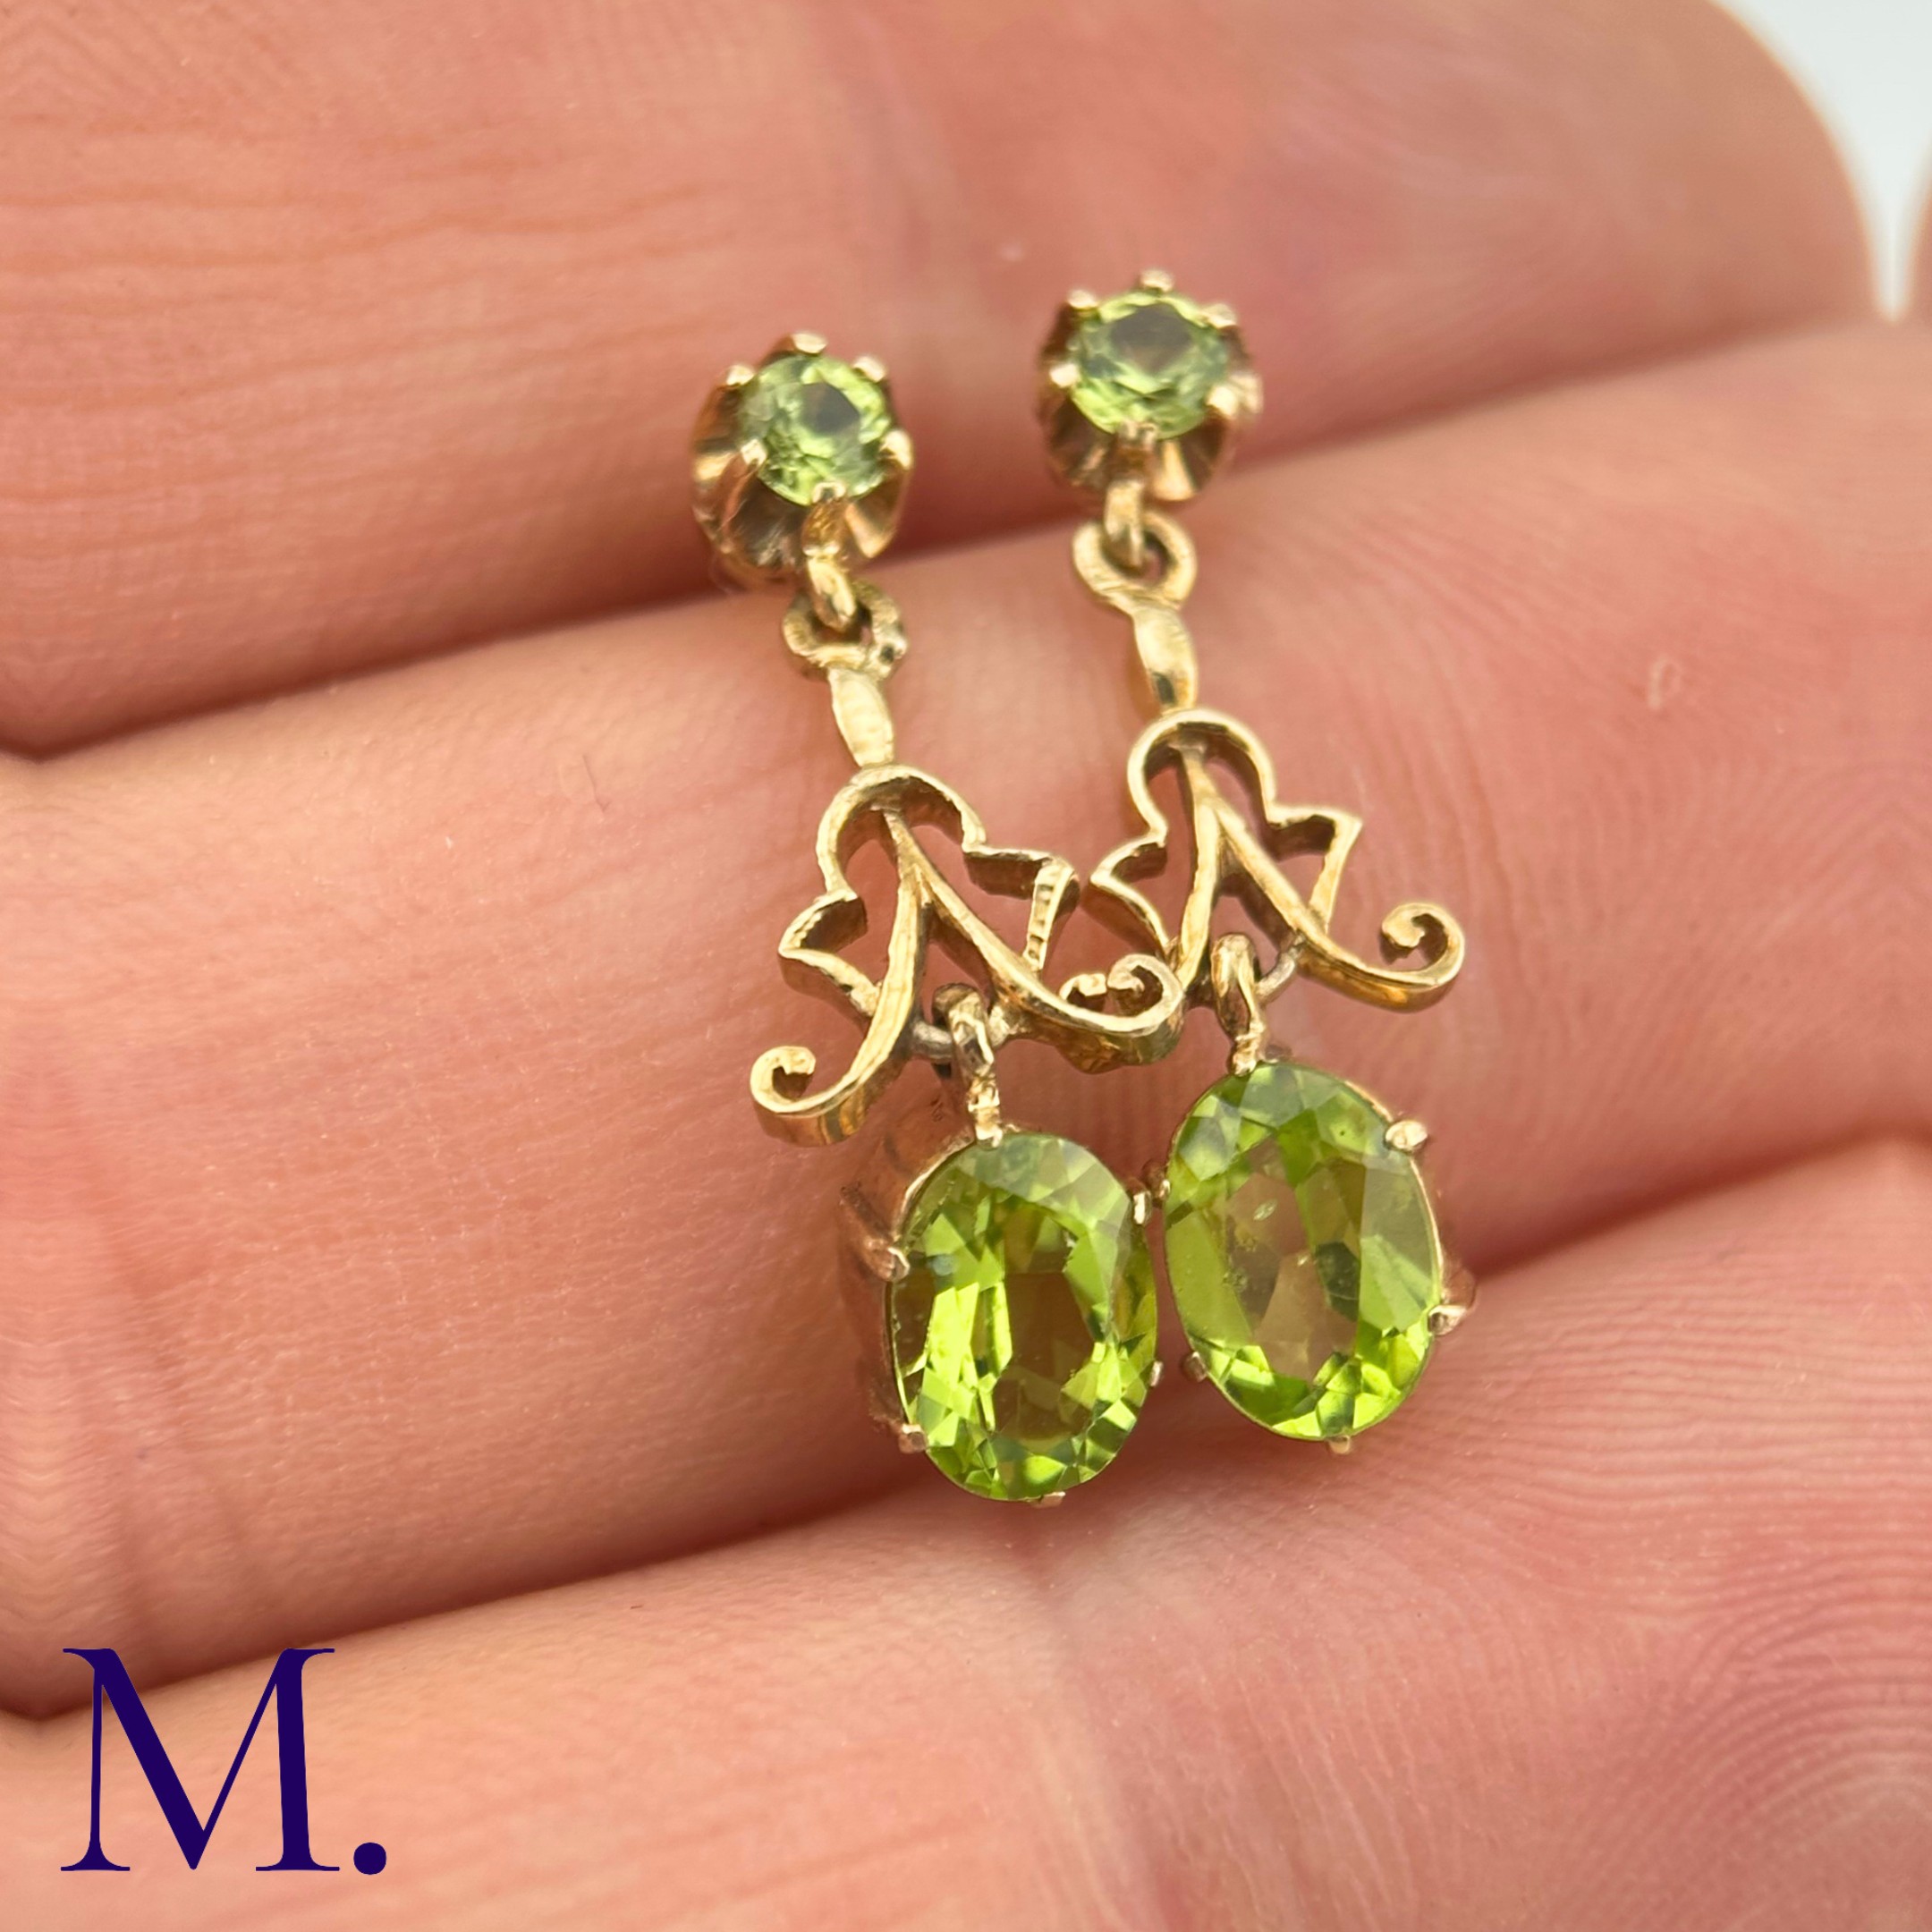 A Pair of Antique Peridot Earrings The peridot earrings are set in 9ct yellow gold. The earrings are - Image 2 of 4